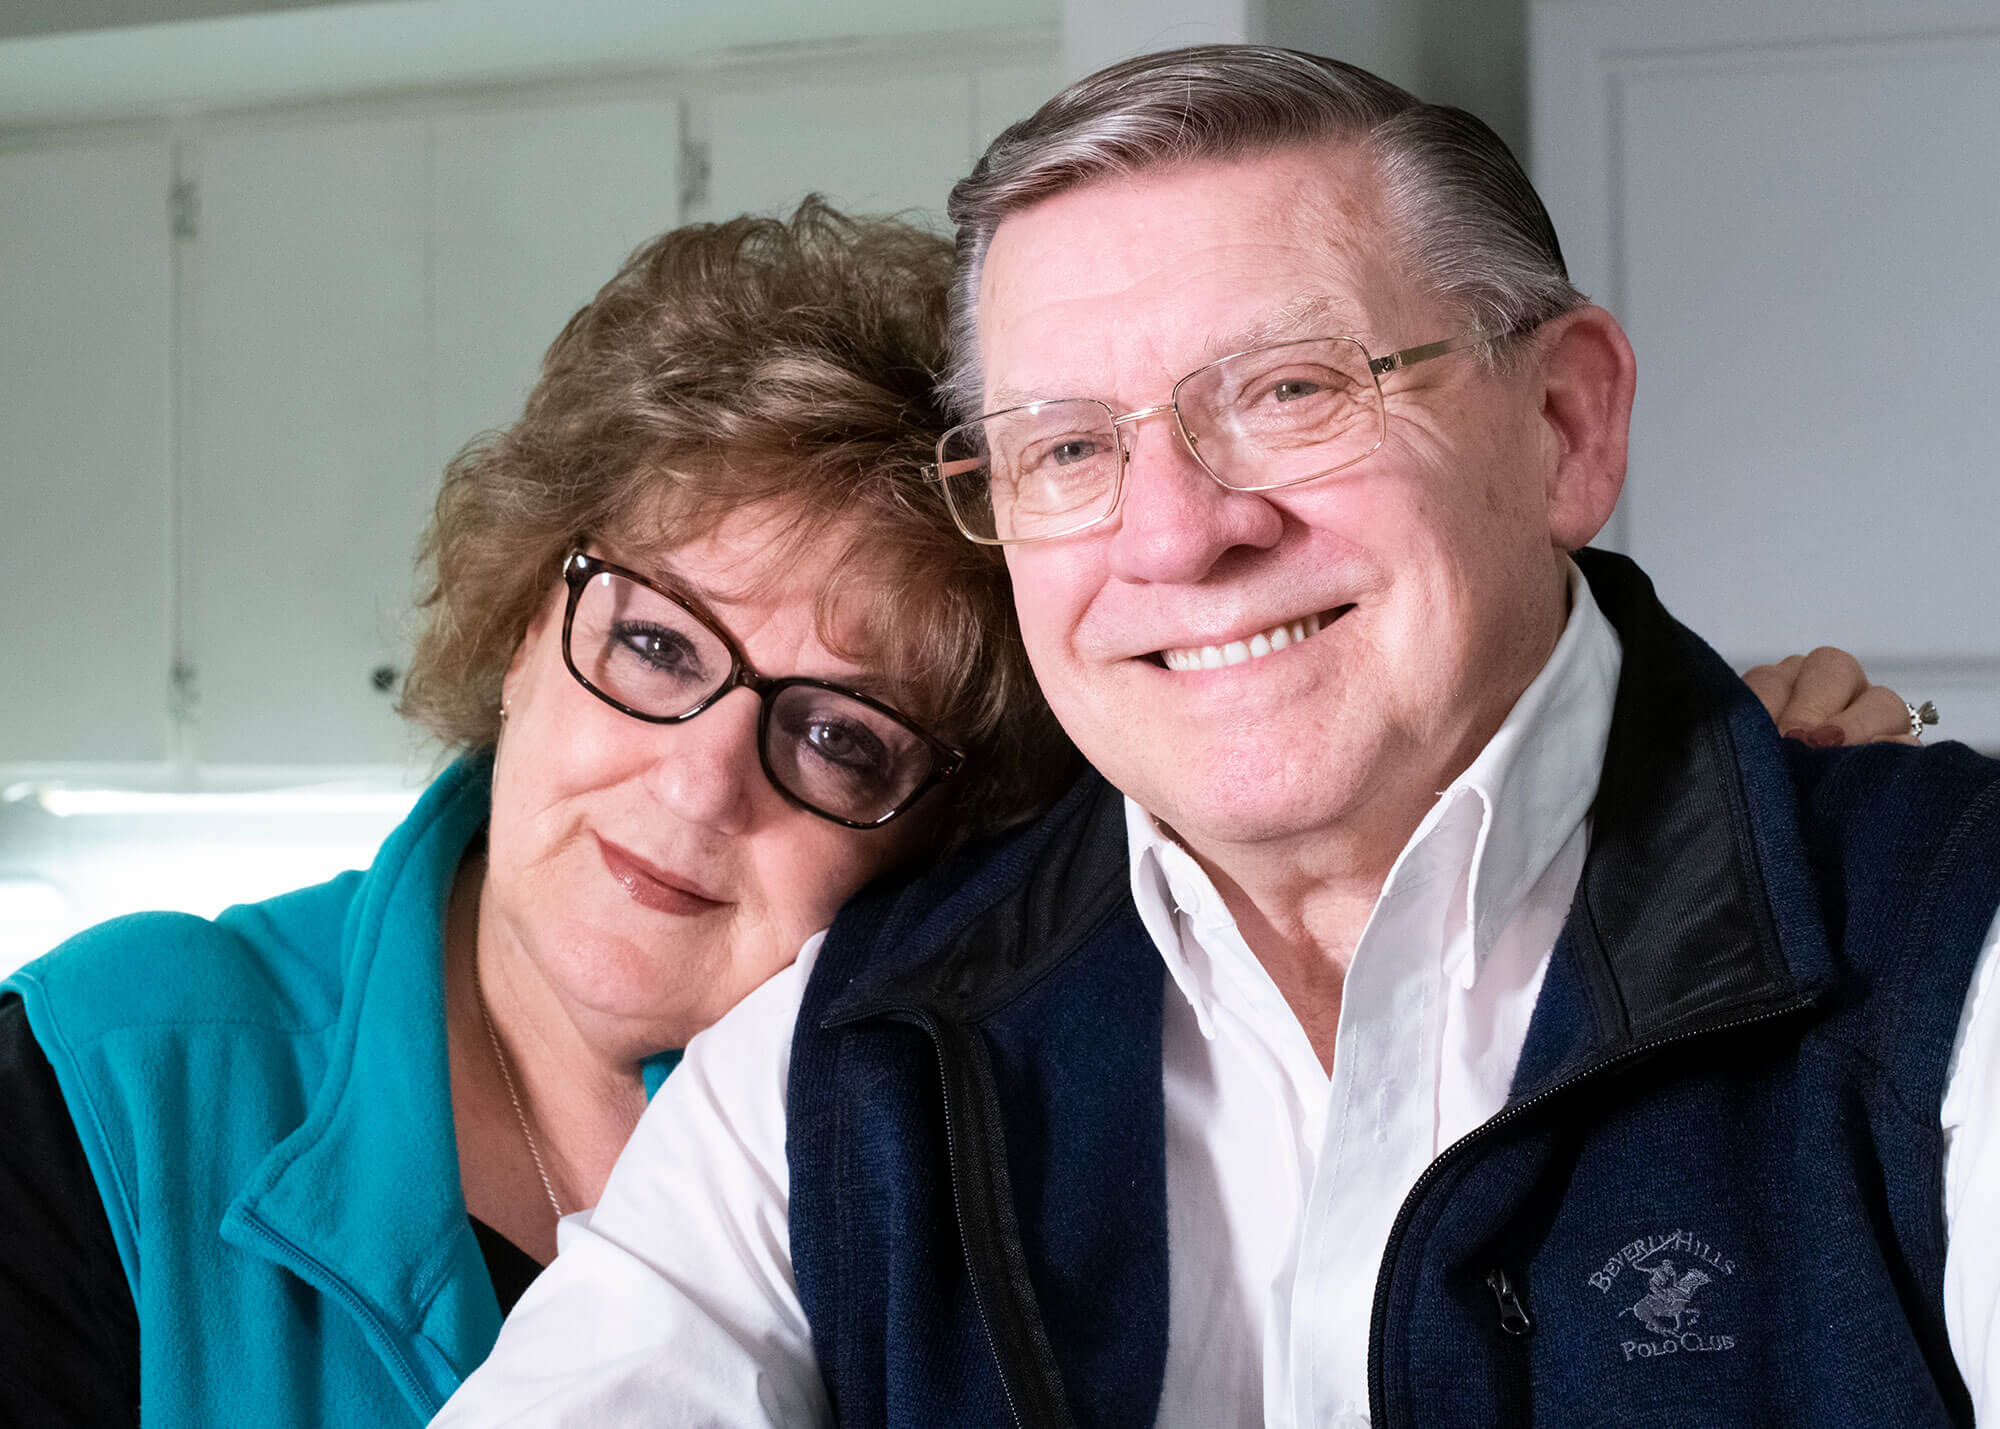 Joe Kiger and his wife Darlene Kiger are photographed at their residence in Washington, West Virginia, on Dec. 4, 2019. The Kigers have spent the last two decades working to uncover the impacts and effects of C8 exposure in the region. 